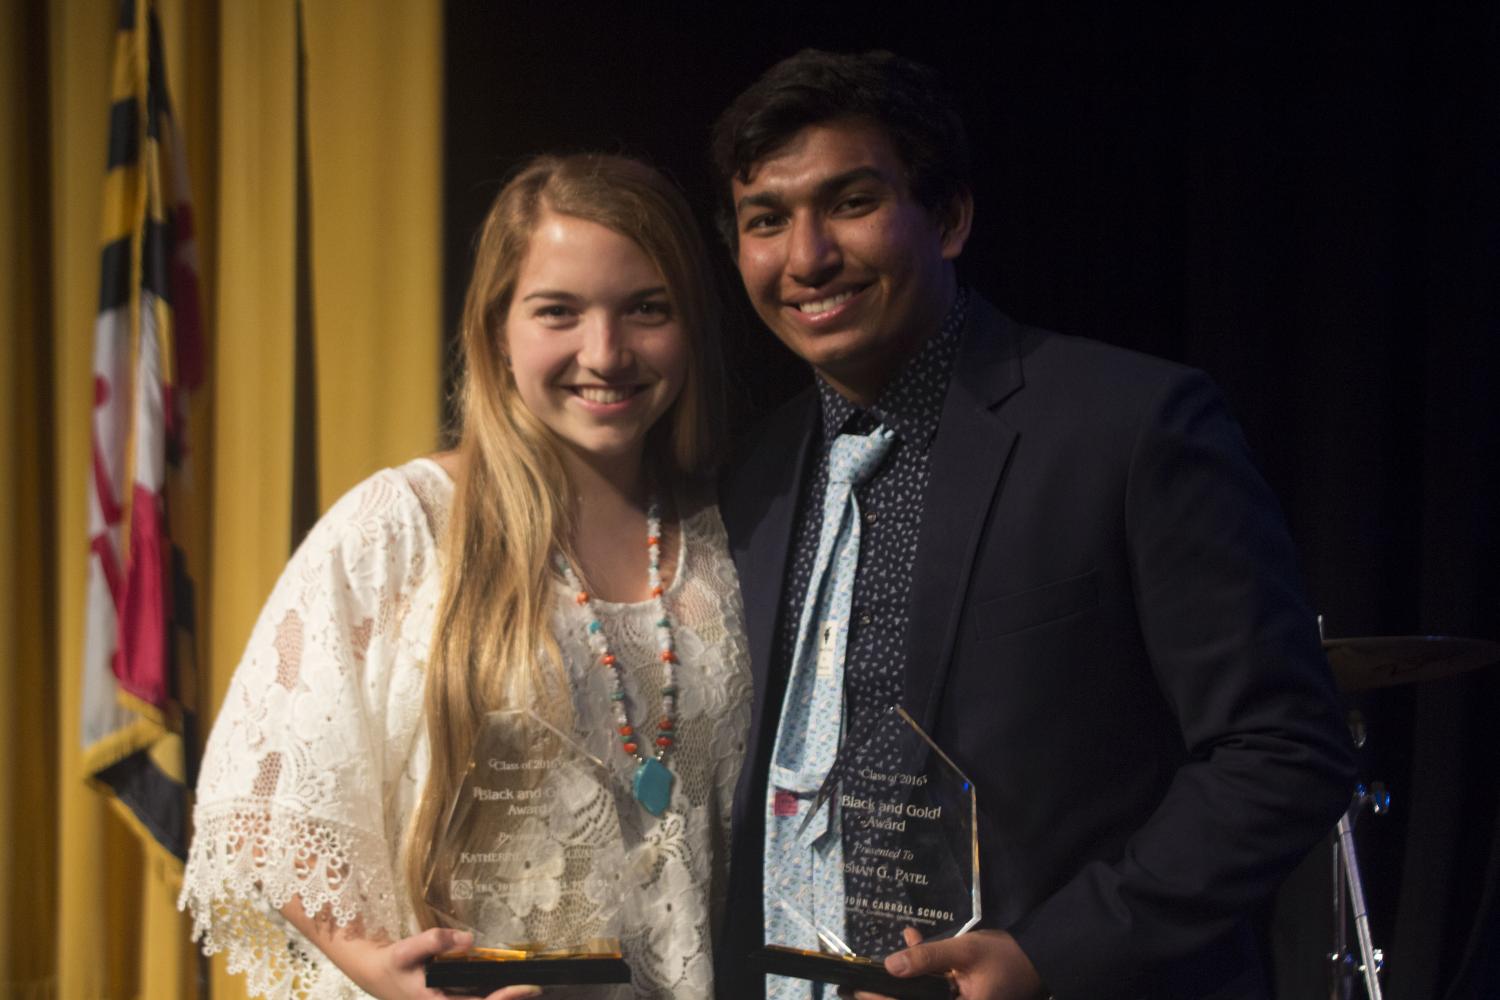 Katie Sullivan and Kishan Patel, class of '16, pose with their Black & Gold Award, which is presented to one male and one female student in the graduating senior class. This year, the nominees are seniors Caroline Cooney, Emma Gromacki, Pia Scotto, Emily Stancliff, Edward Benner, Nicholas Hinke, Caleb Olsen, and Daniel Robinson.